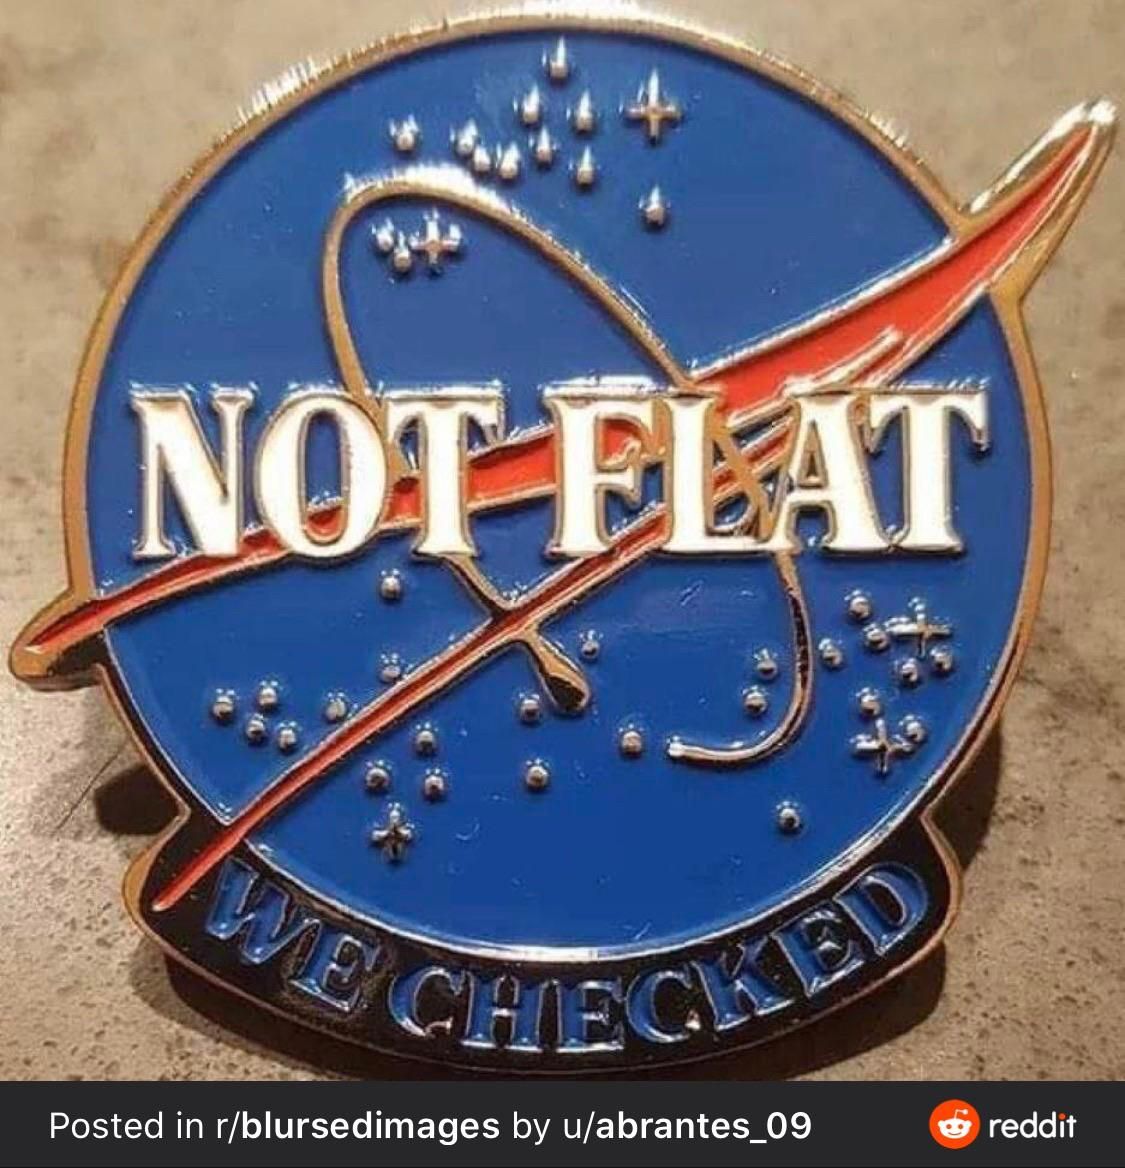 Not flat we checked